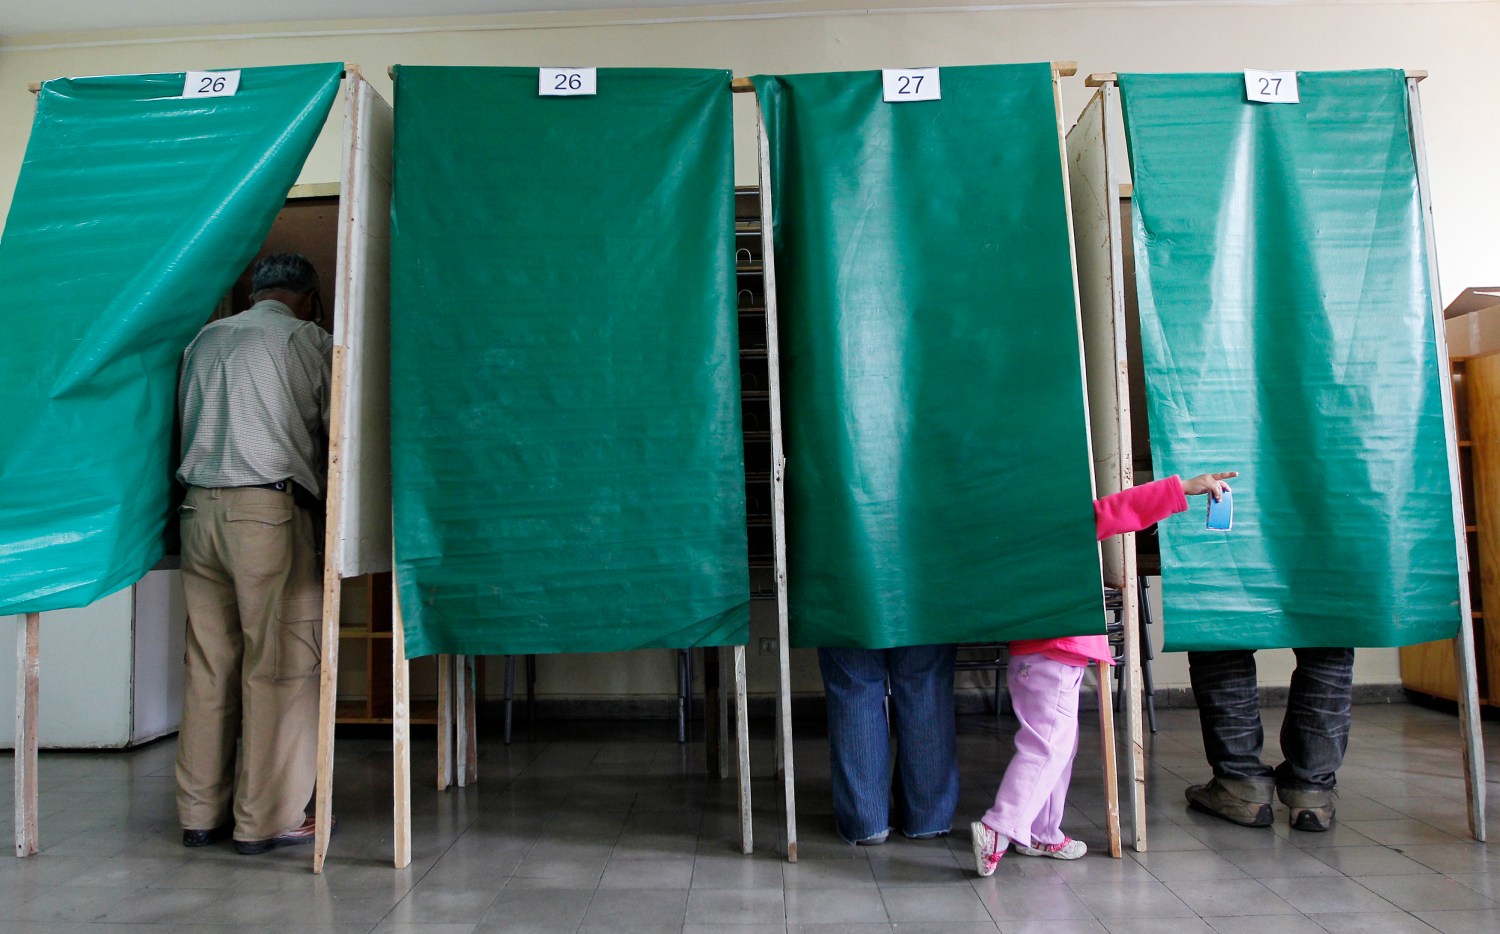 A child gestures as people cast their vote at a public school during municipal elections in Valparaiso city, about 121 km (75 miles) northwest of Santiago, October 28, 2012. Chilean voters will elect mayors and councilmen across 15 political regions on Sunday. REUTERS/Eliseo Fernandez (CHILE - Tags: POLITICS ELECTIONS) - GM1E8AT03GE01